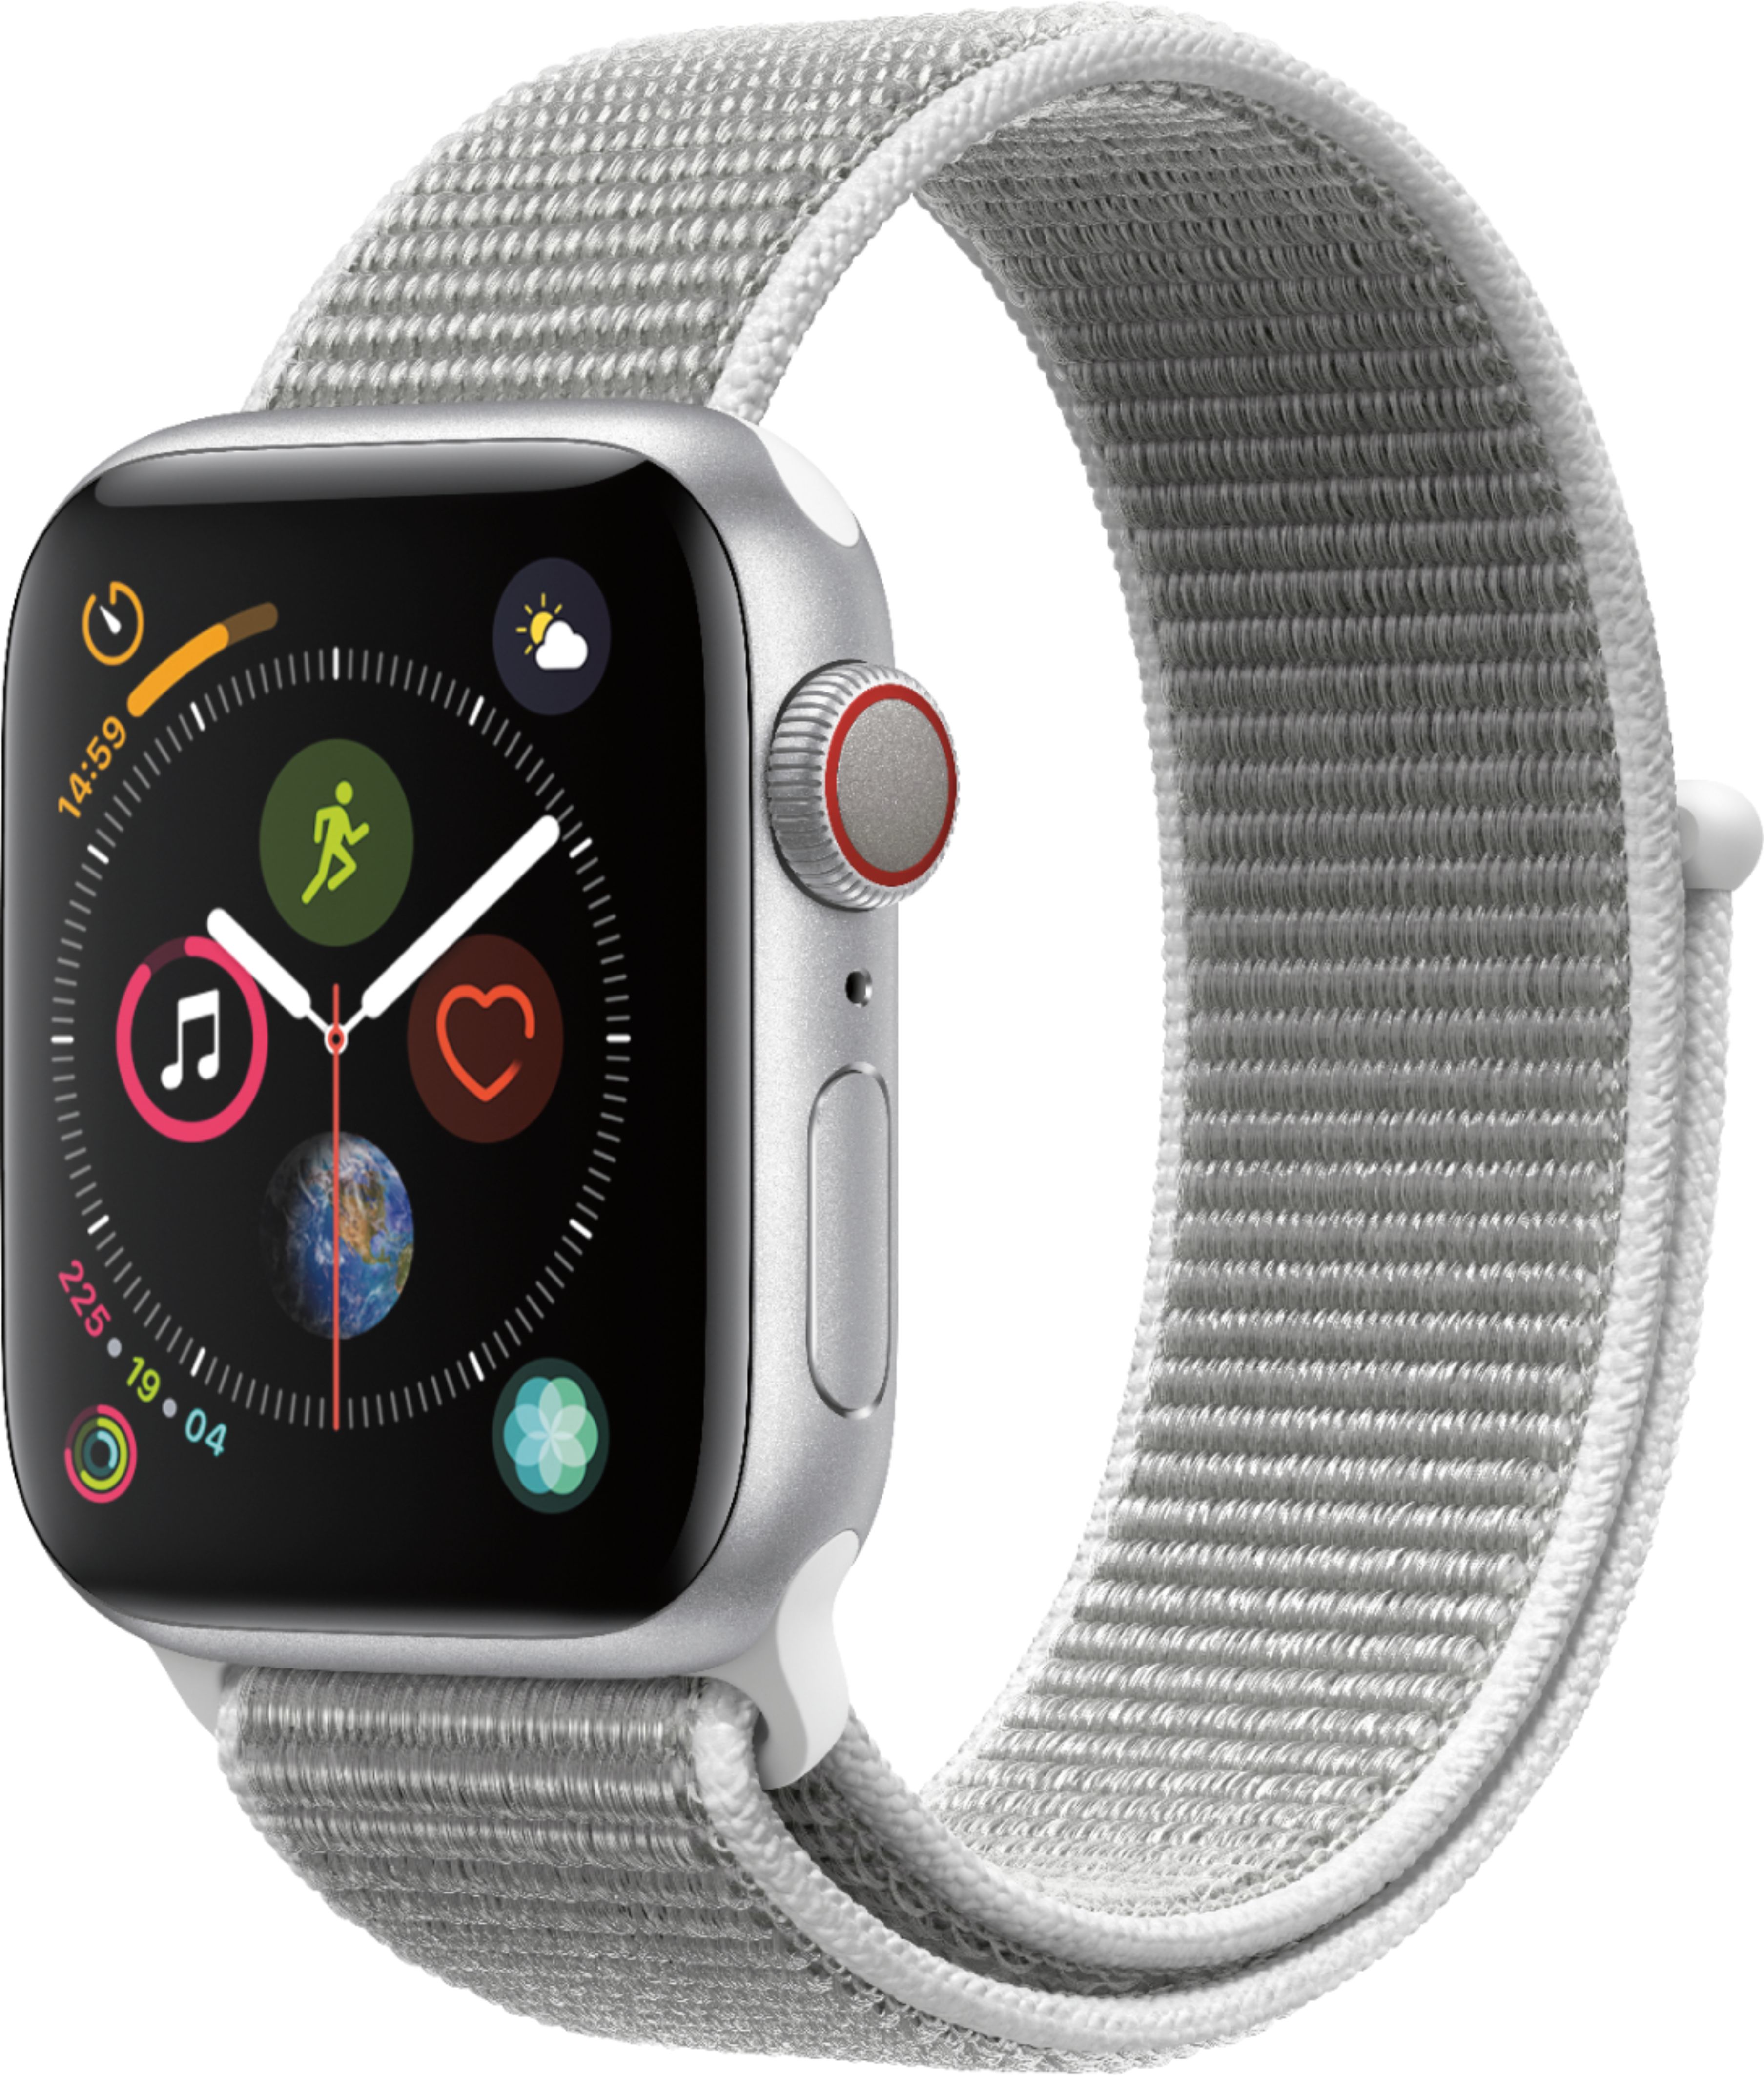 0400063040942 - GEEK SQUAD CERTIFIED REFURBISHED APPLE WATCH SERIES 4 (GPS + CELLULAR) 40MM ALUMINUM CASE WITH SEASHELL SPORT LOOP - SILVER ALUMINUM